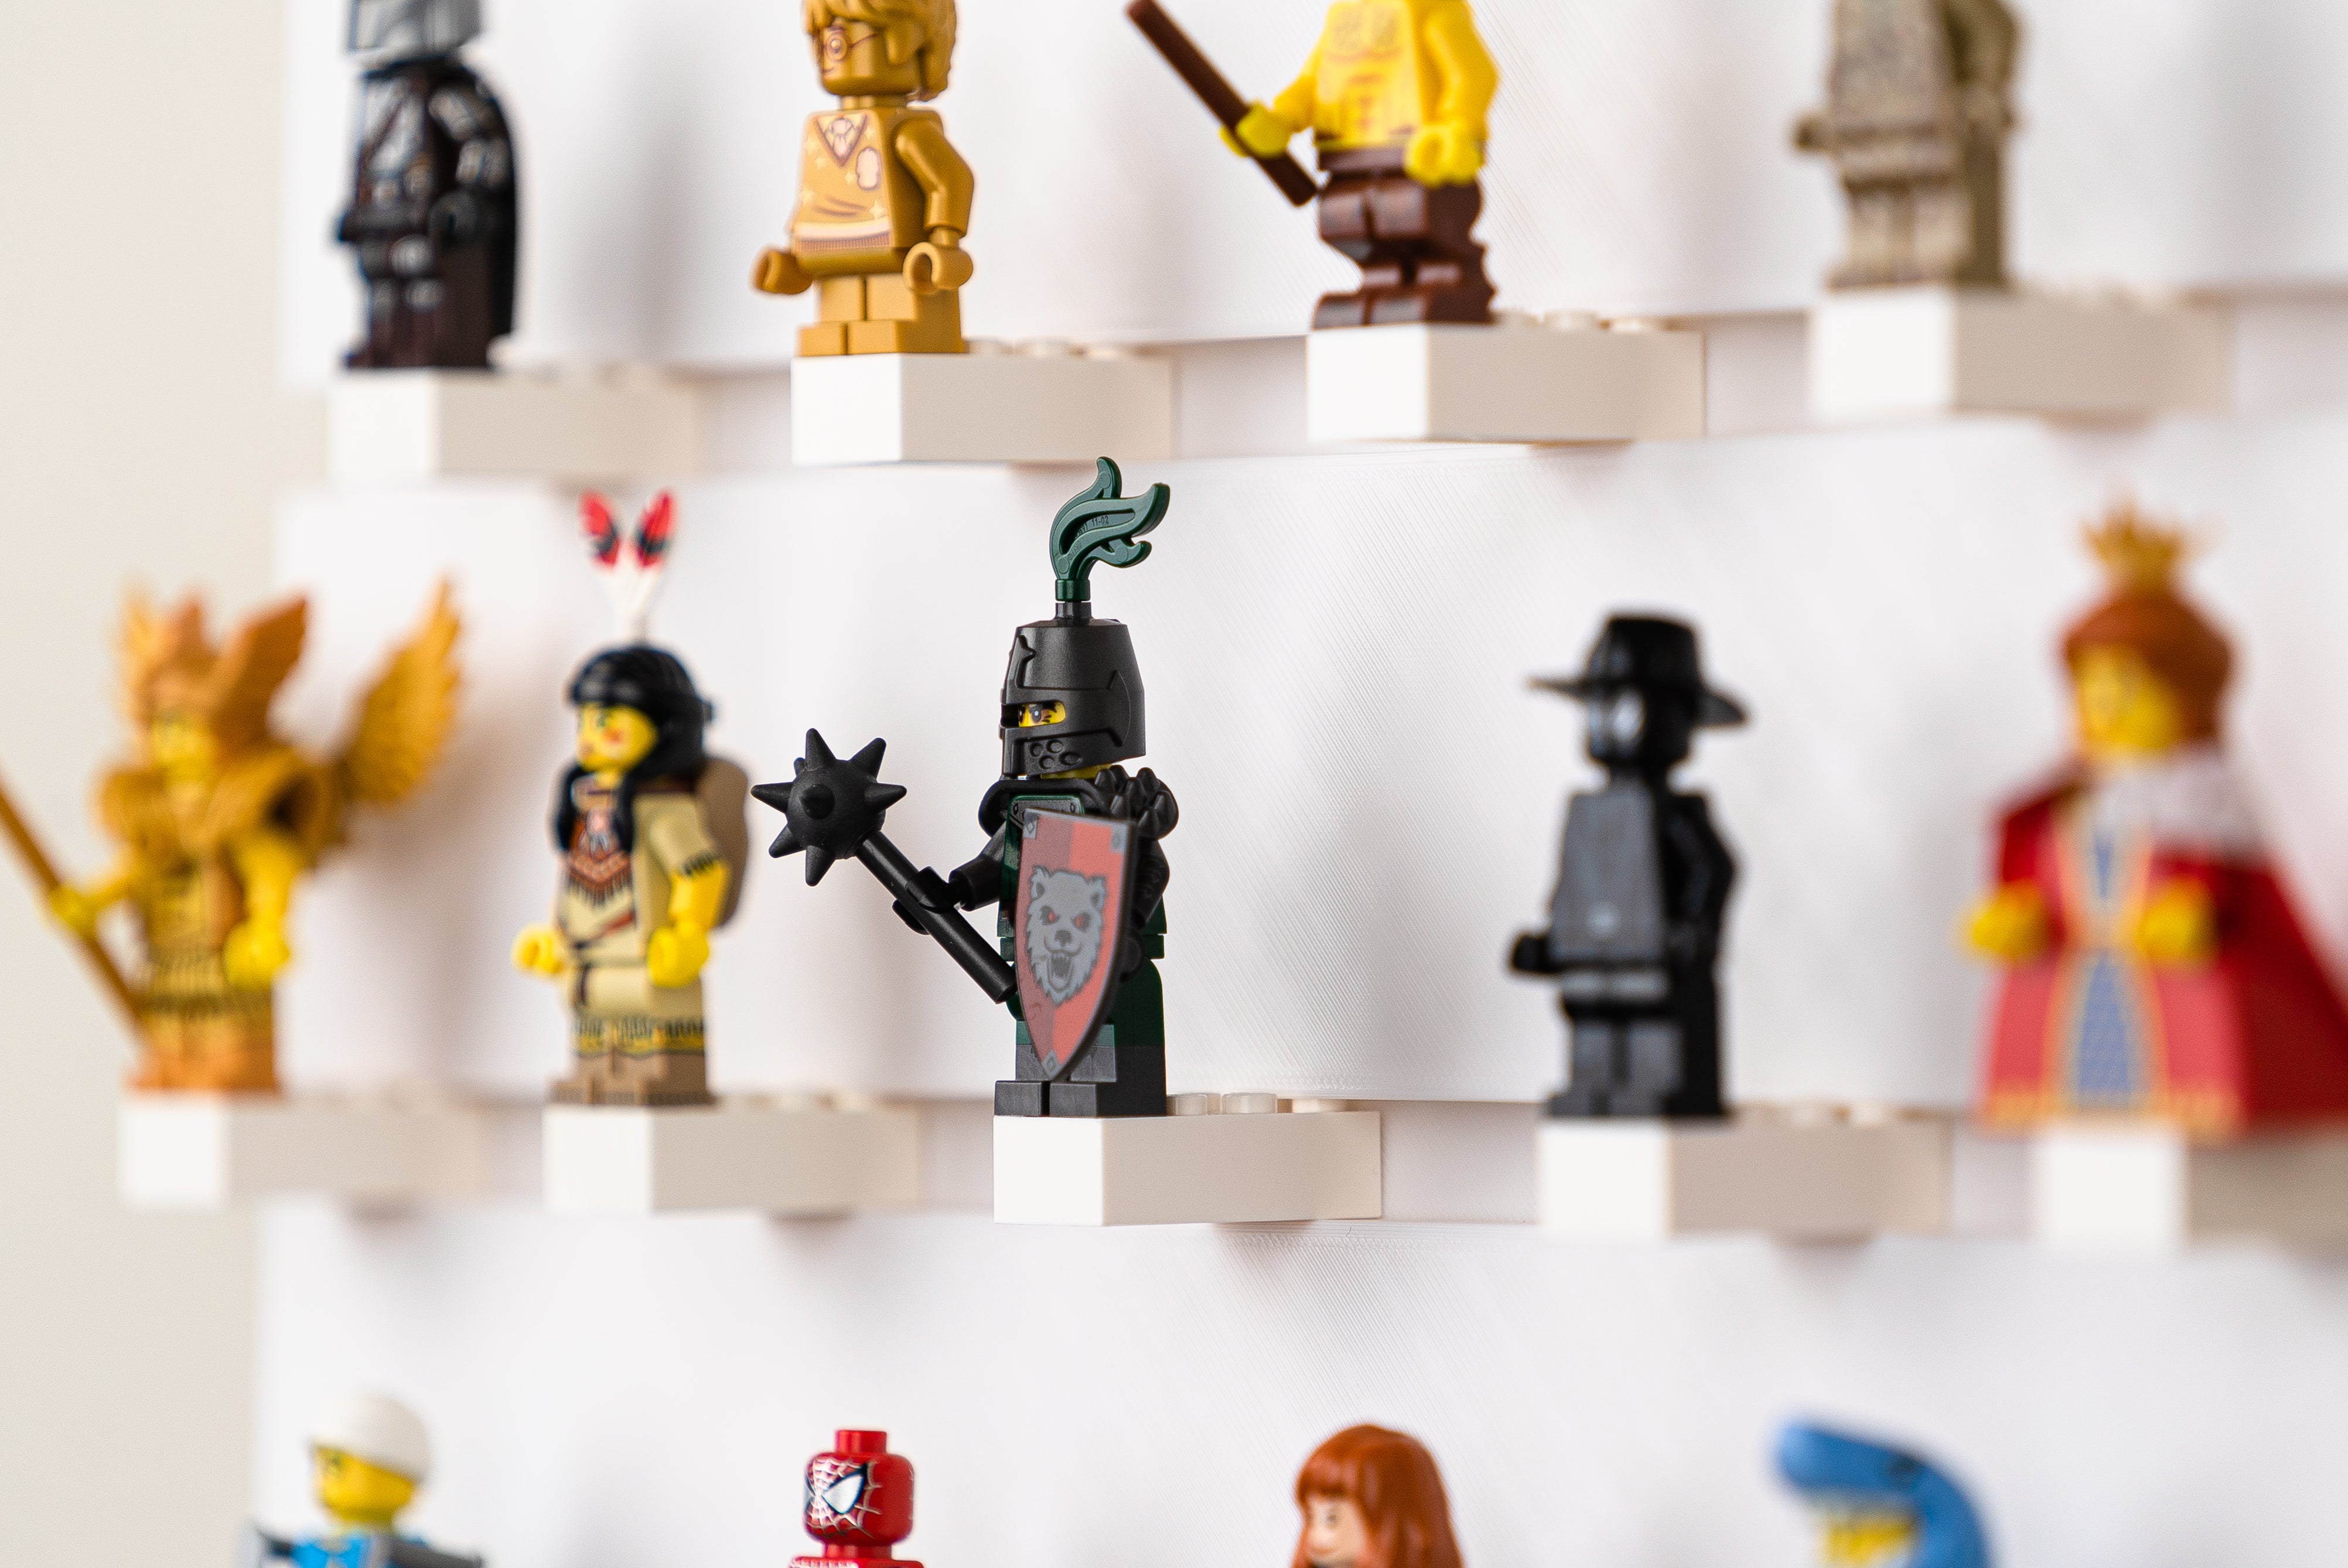 Ideas for Minifigure Wall Displays (and other Lego builds)